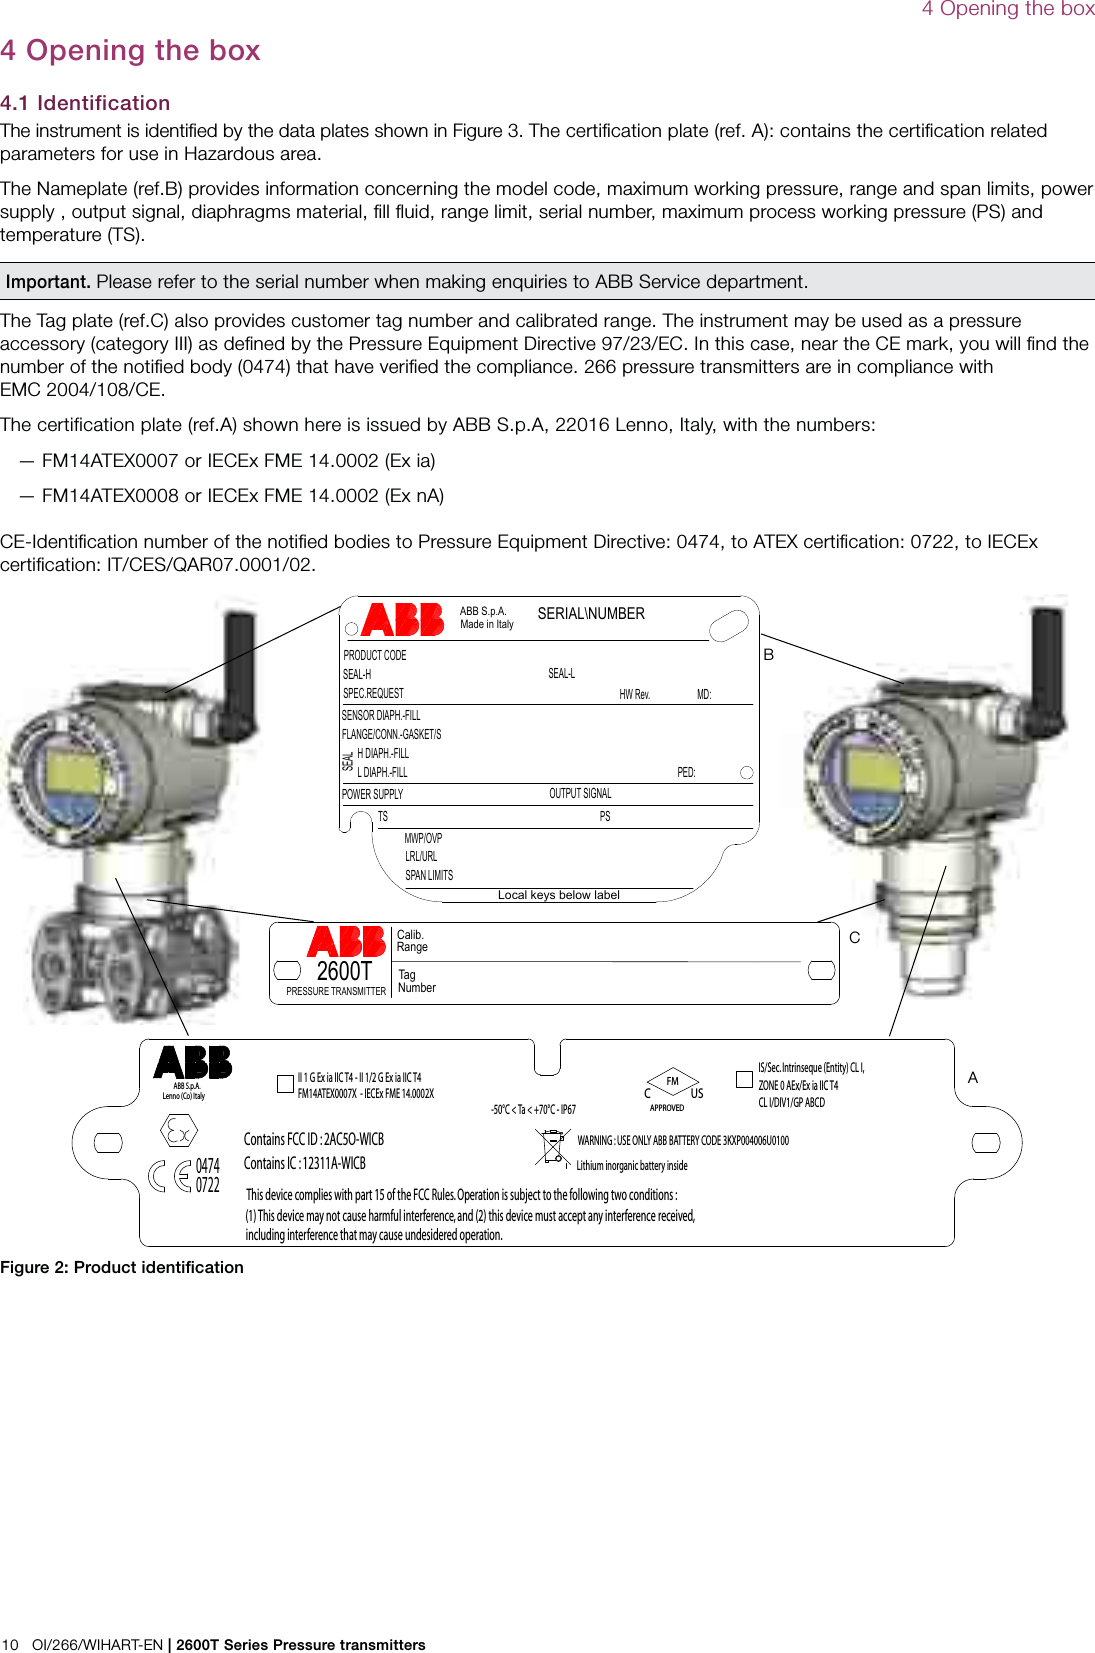 10   OI/266/WIHART-EN | 2600T Series Pressure transmitters4 Opening the boxFigure 2: Product identiﬁcationLocal keys below labelPRODUCT CODESEAL-H SEAL-LSPEC.REQUESTLRL/URLSPAN LIMITSPOWER SUPPLY OUTPUT SIGNAL ABB S.p.A. Made in Italy TS PSSERIAL\NUMBERSENSOR DIAPH.-FILLFLANGE/CONN.-GASKET/SH DIAPH.-FILLL DIAPH.-FILLSEALHW Rev. MD:PED:MWP/OVP04740722II 1 G Ex ia IIC T4 - II 1/2 G Ex ia IIC T4FM14ATEX0007X  - IECEx FME 14.0002XLithium inorganic battery insideIS/Sec. Intrinseque (Entity) CL I, ZONE 0 AEx/Ex ia IIC T4CL I/DIV1/GP ABCDAPPROVEDFMC US-50°C &lt; Ta &lt; +70°C - IP67WARNING : USE ONLY ABB BATTERY CODE 3KXP004006U0100Contains FCC ID : 2AC5O-WICBThis device complies with part 15 of the FCC Rules. Operation is subject to the following two conditions :(1) This device may not cause harmful interference, and (2) this device must accept any interference received,including interference that may cause undesidered operation.Contains IC : 12311A-WICBABB S.p.A.Lenno (Co) ItalyABC4 Opening the box4.1 IdentificationThe instrument is identiﬁed by the data plates shown in Figure 3. The certiﬁcation plate (ref. A): contains the certiﬁcation related parameters for use in Hazardous area. The Nameplate (ref.B) provides information concerning the model code, maximum working pressure, range and span limits, power supply , output signal, diaphragms material, ﬁll ﬂuid, range limit, serial number, maximum process working pressure (PS) and temperature (TS). Important. Please refer to the serial number when making enquiries to ABB Service department. The Tag plate (ref.C) also provides customer tag number and calibrated range. The instrument may be used as a pressure accessory (category III) as deﬁned by the Pressure Equipment Directive 97/23/EC. In this case, near the CE mark, you will ﬁnd the number of the notiﬁed body (0474) that have veriﬁed the compliance. 266 pressure transmitters are in compliance with EMC 2004/108/CE.The certification plate (ref.A) shown here is issued by ABB S.p.A, 22016 Lenno, Italy, with the numbers:  — FM14ATEX0007 or IECEx FME 14.0002 (Ex ia)  — FM14ATEX0008 or IECEx FME 14.0002 (Ex nA)CE-Identiﬁcation number of the notiﬁed bodies to Pressure Equipment Directive: 0474, to ATEX certiﬁcation: 0722, to IECEx certiﬁcation: IT/CES/QAR07.0001/02.2600TTag NumberCalib.RangePRESSURE TRANSMITTER